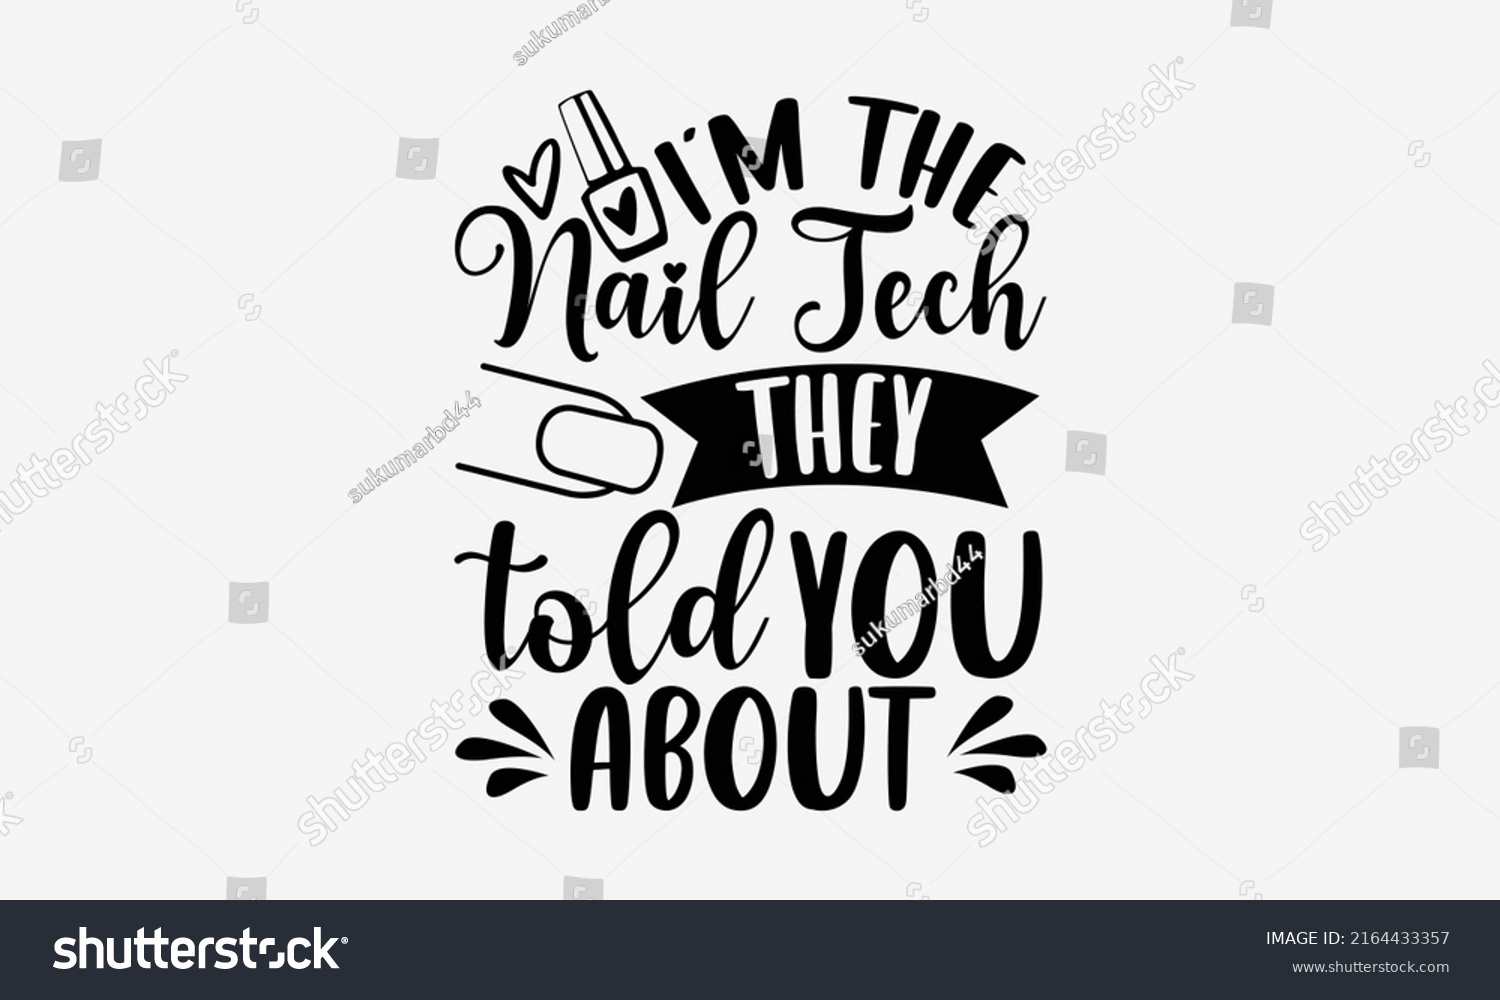 SVG of I’m the nail tech they told you about - Nail Tech  t shirt design, Hand drawn lettering phrase, Calligraphy graphic design, SVG Files for Cutting Cricut and Silhouette svg